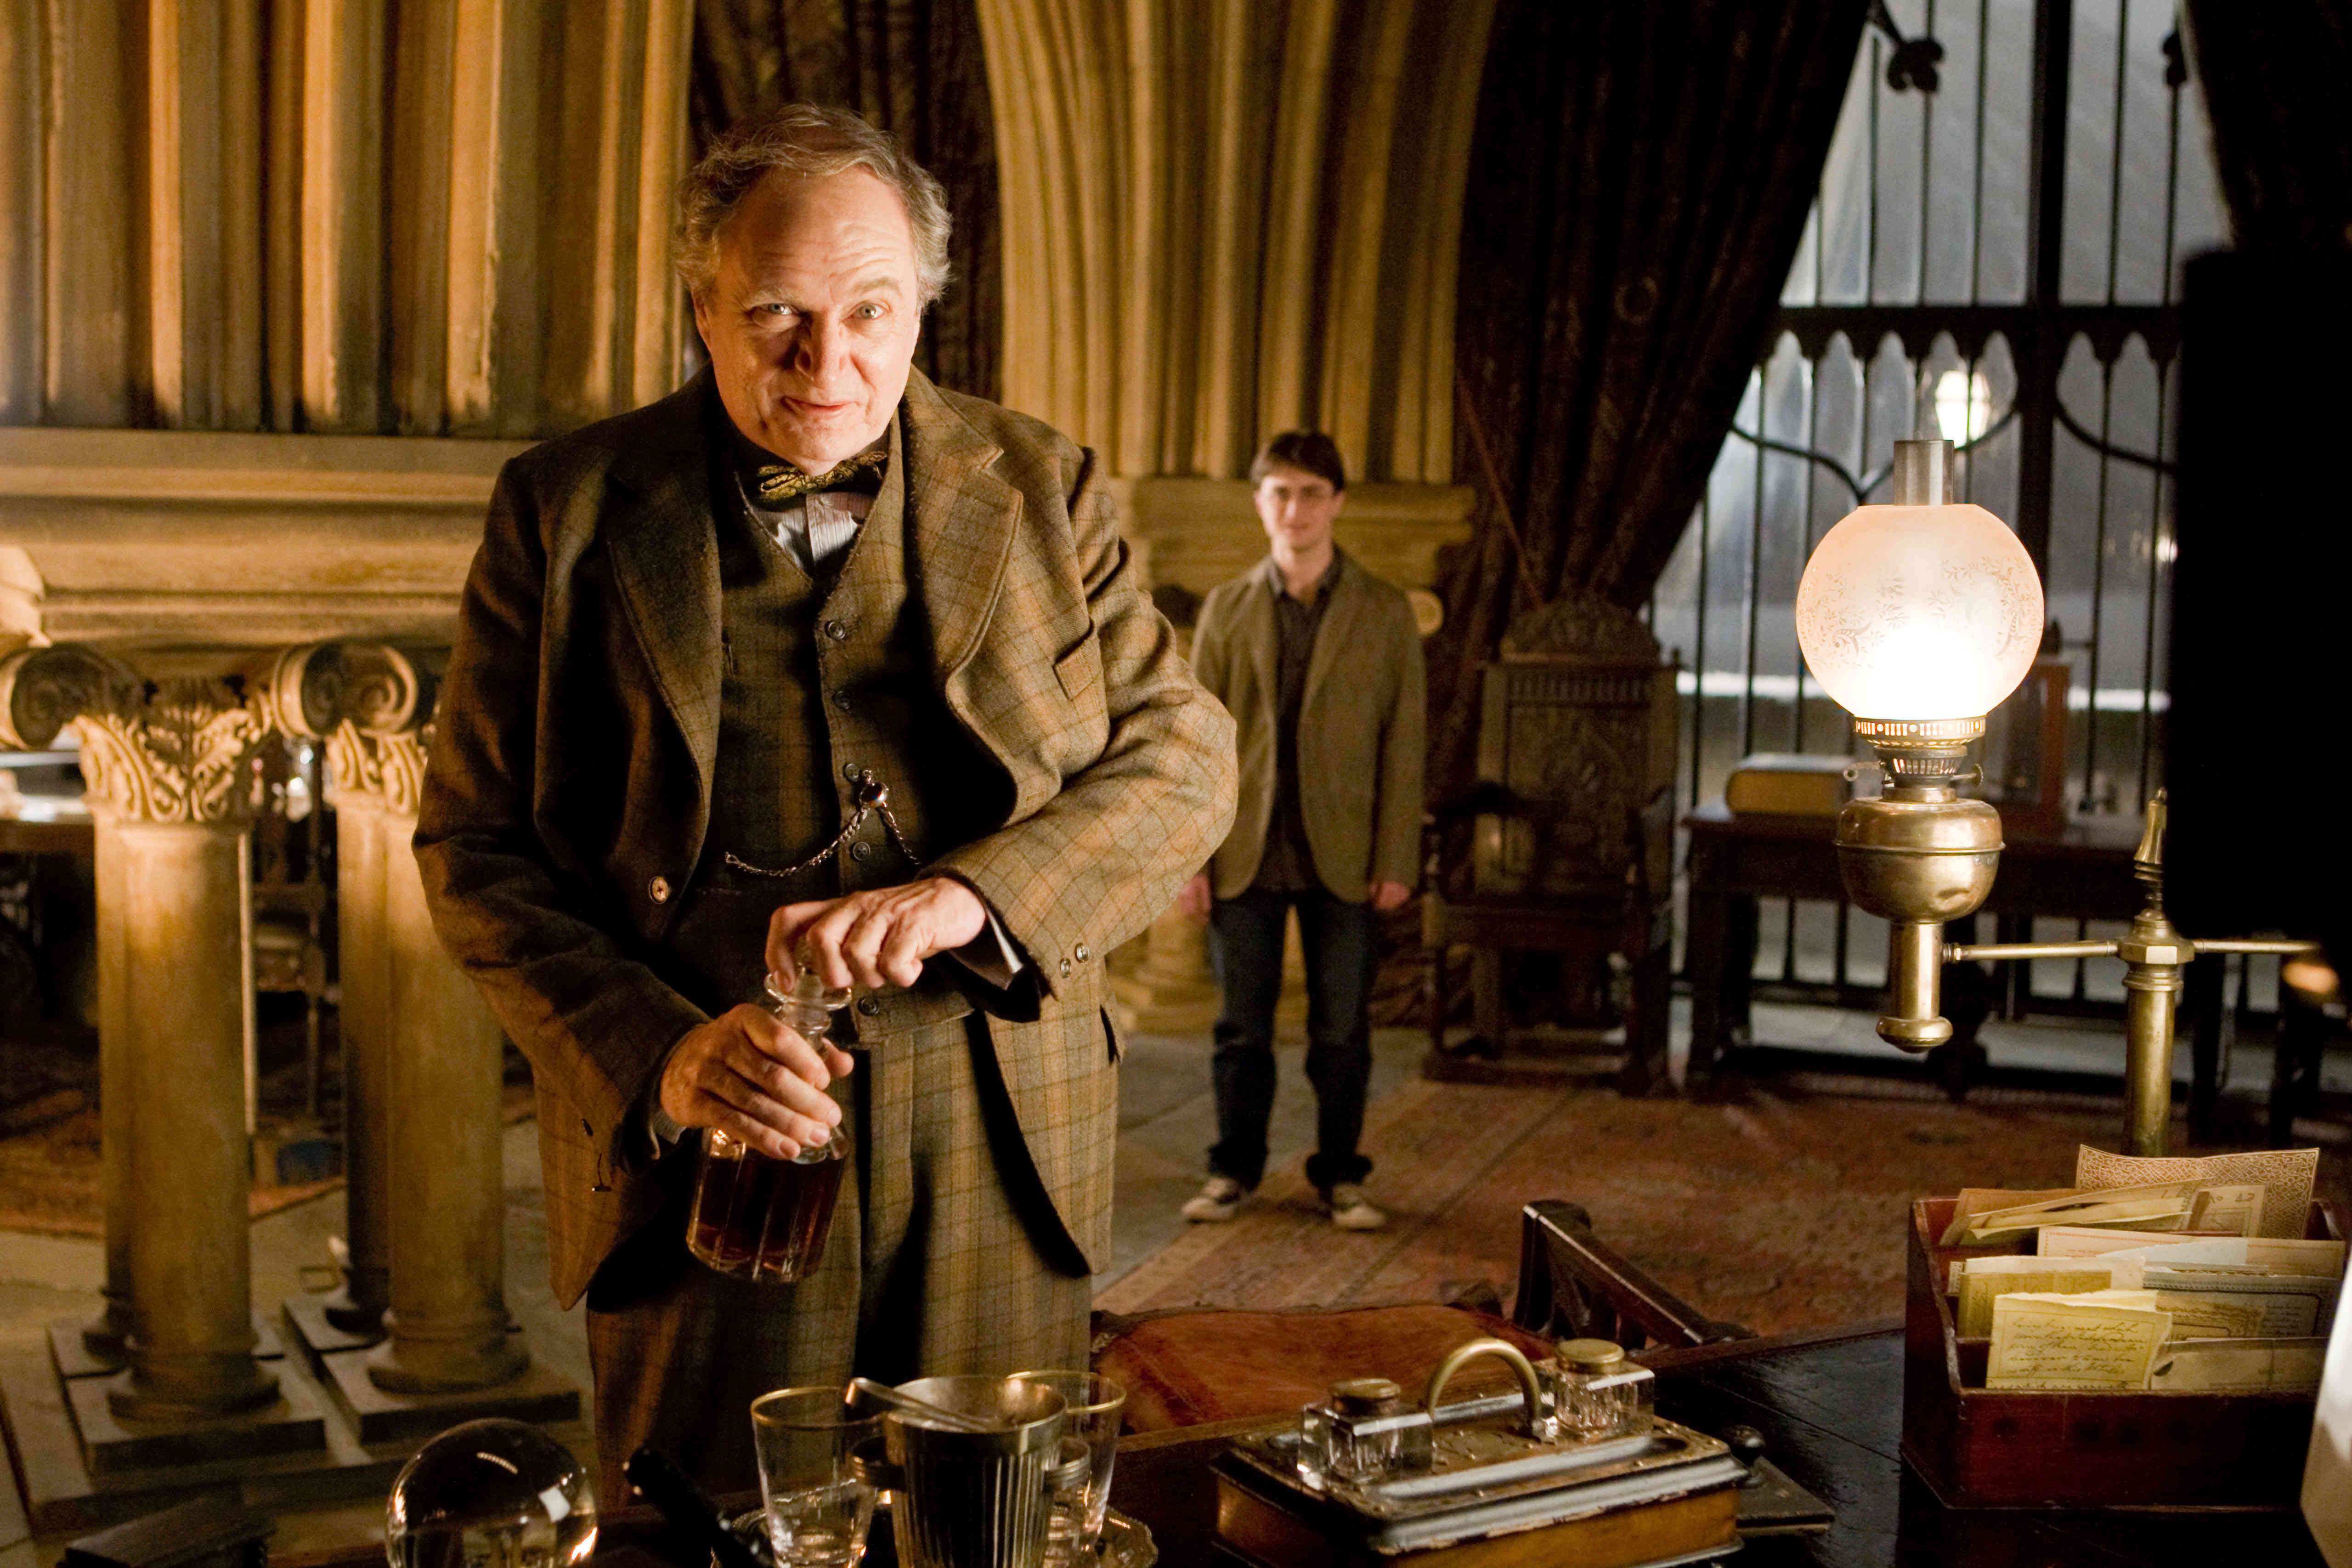 Jim Broadbent stars as Horace Slughorn and Daniel Radcliffe stars as Harry Potter in Warner Bros Pictures' Harry Potter and the Half-Blood Prince (2009)